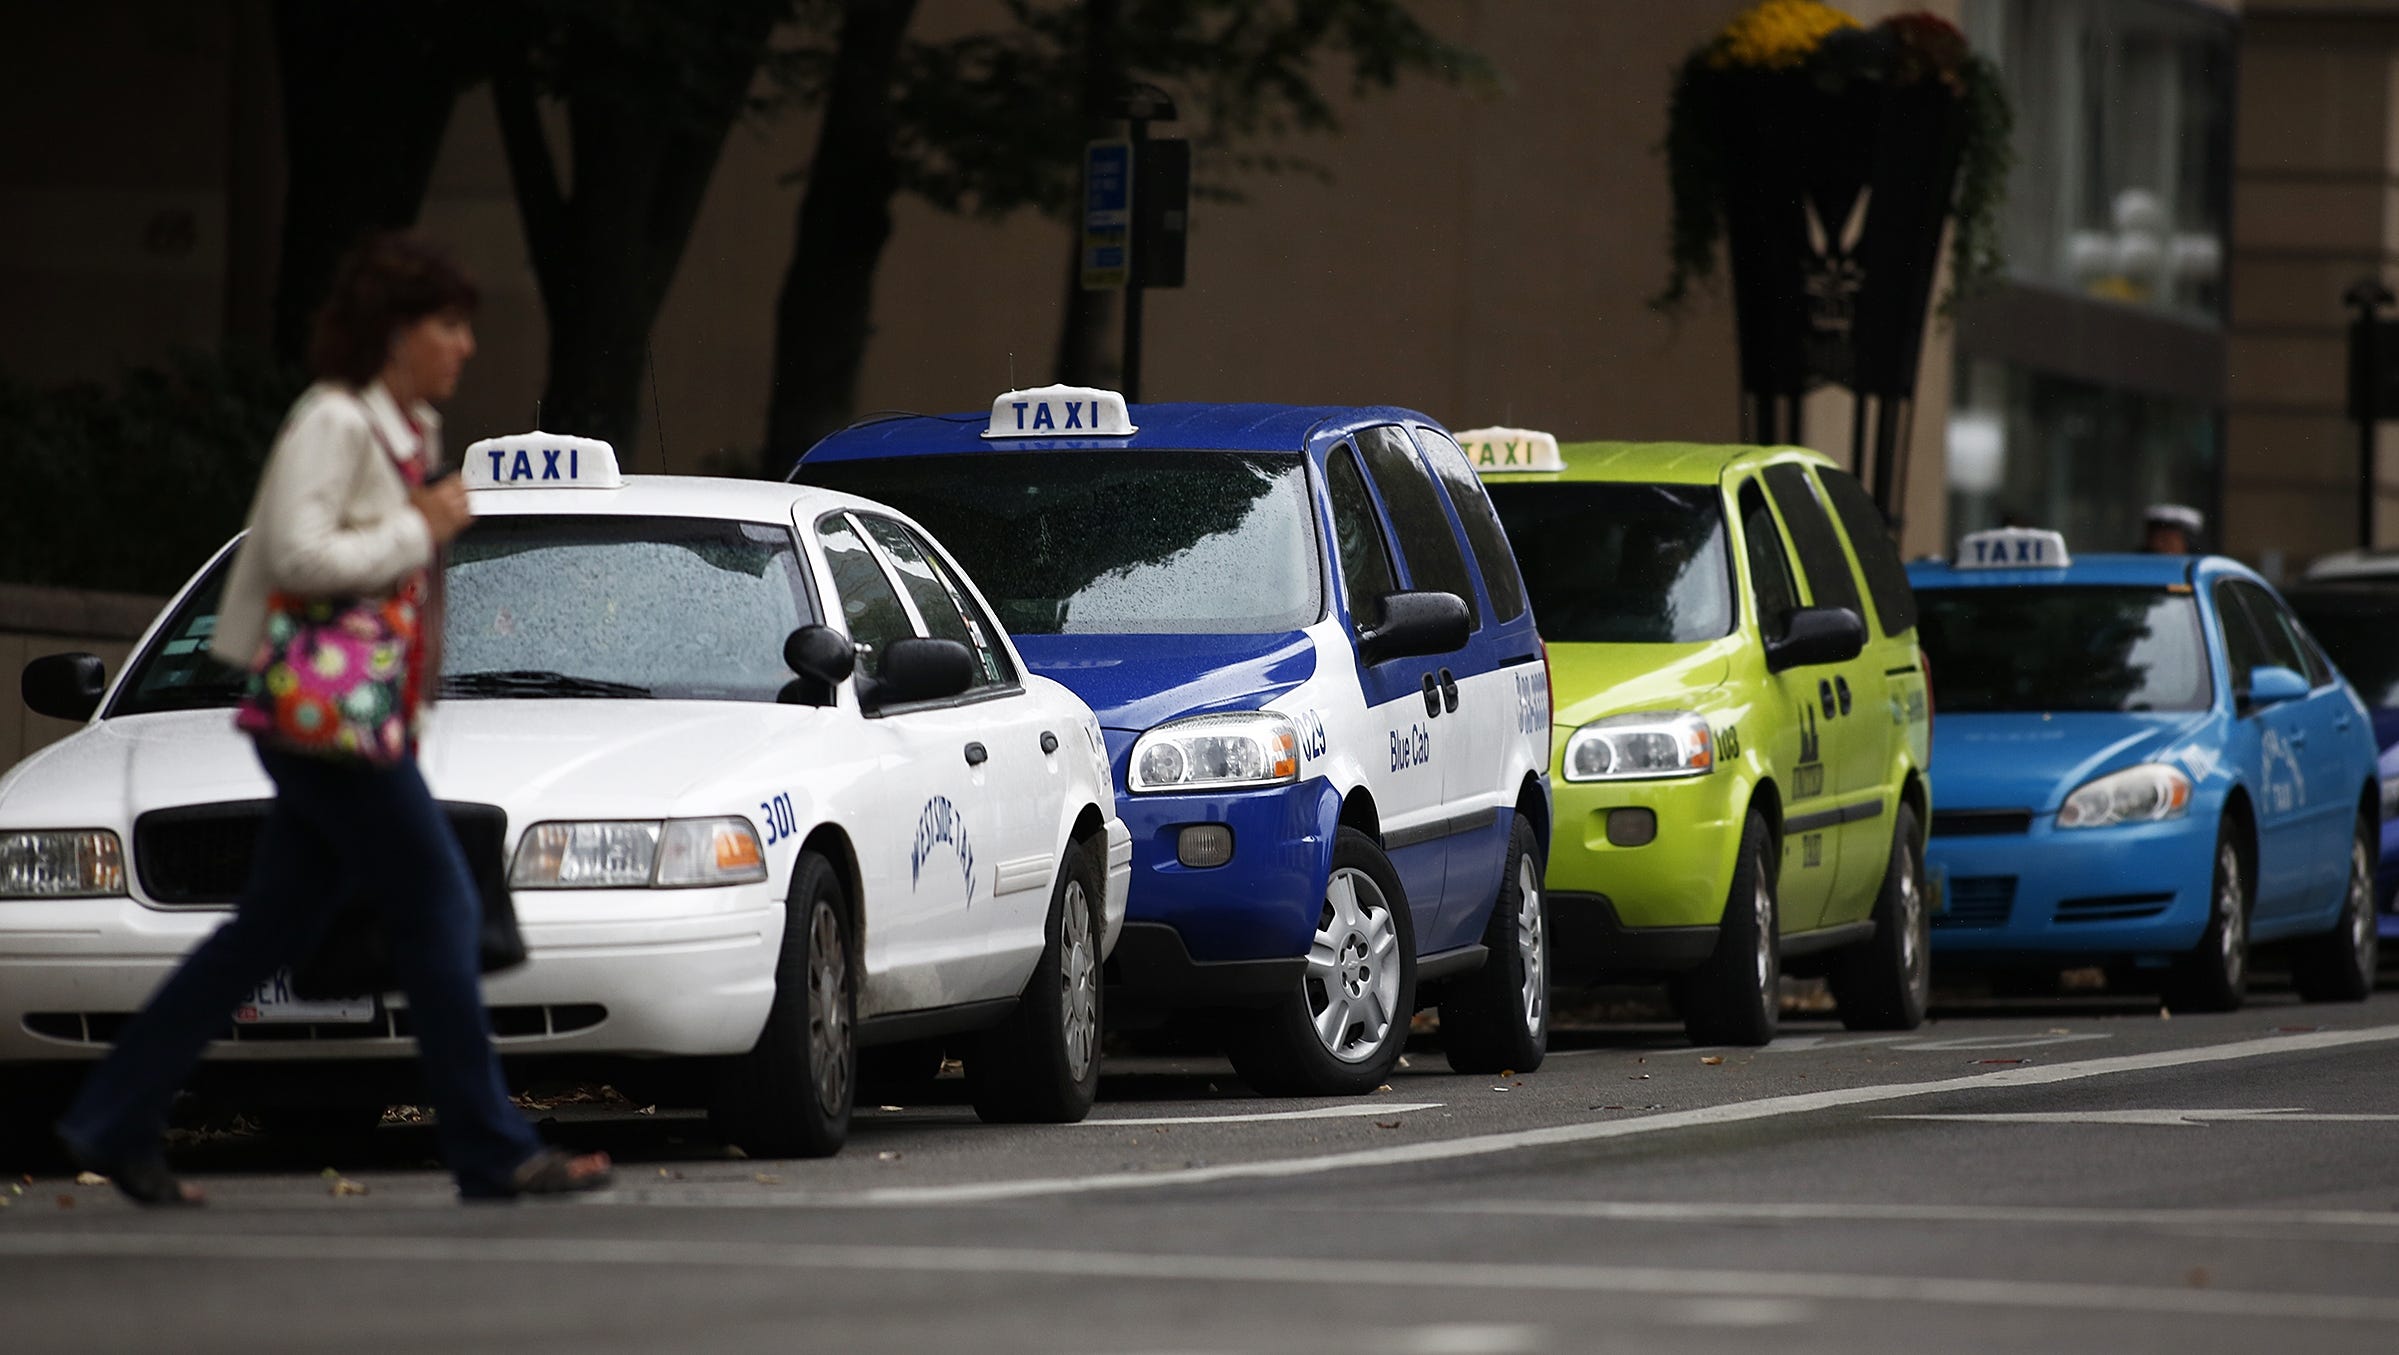 smart-columbus-offering-electric-vehicle-rebates-to-taxi-companies